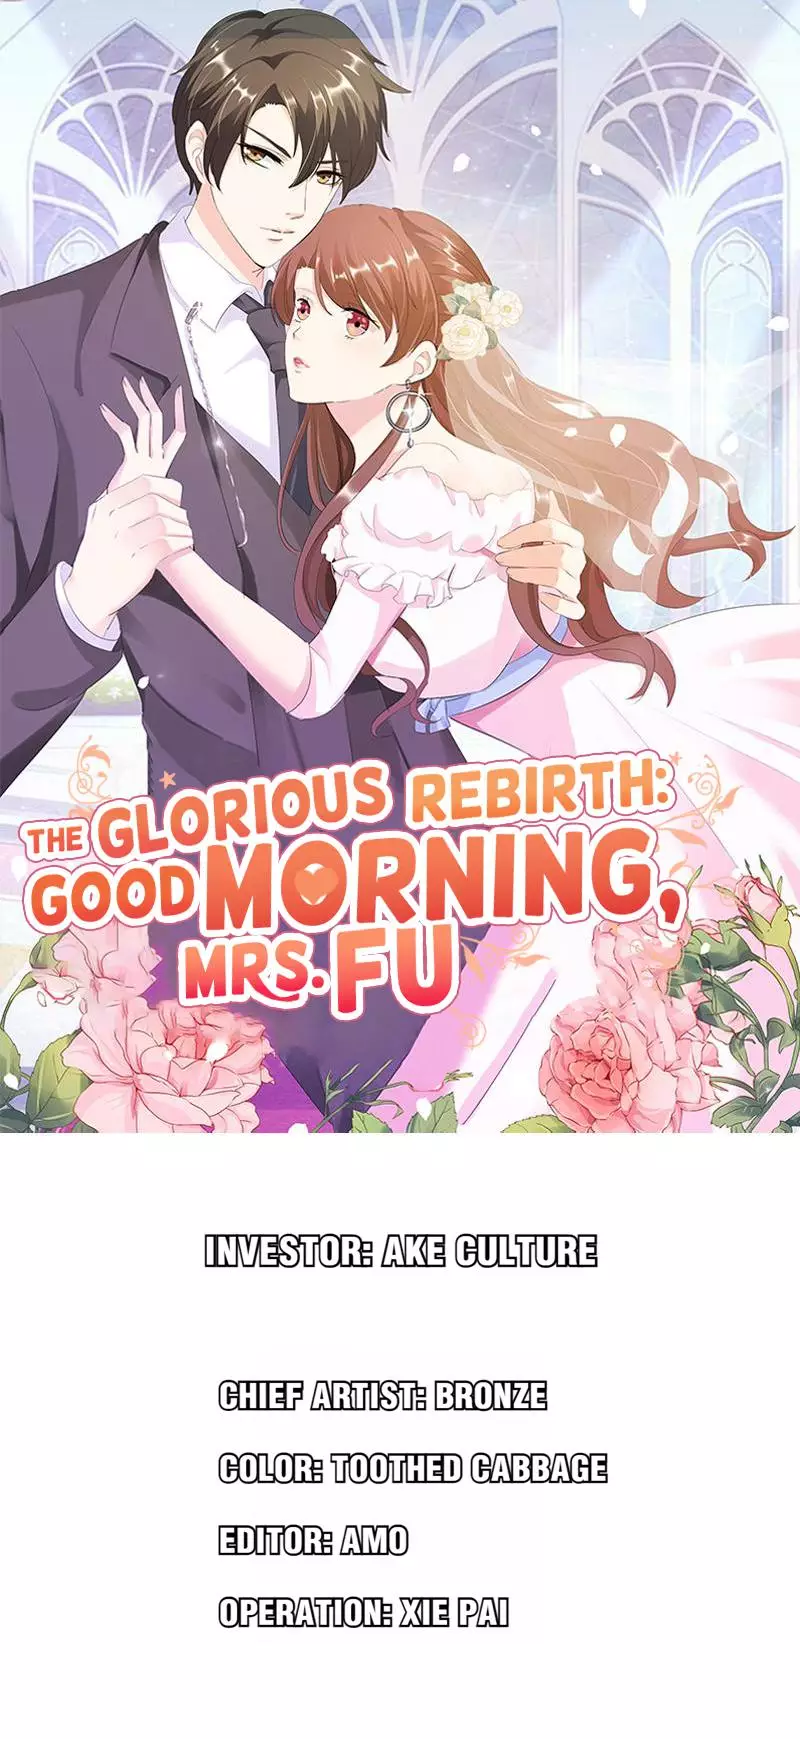 The Glorious Rebirth: Good Morning, Mrs. Fu - 32 page 1-3de5c7d0